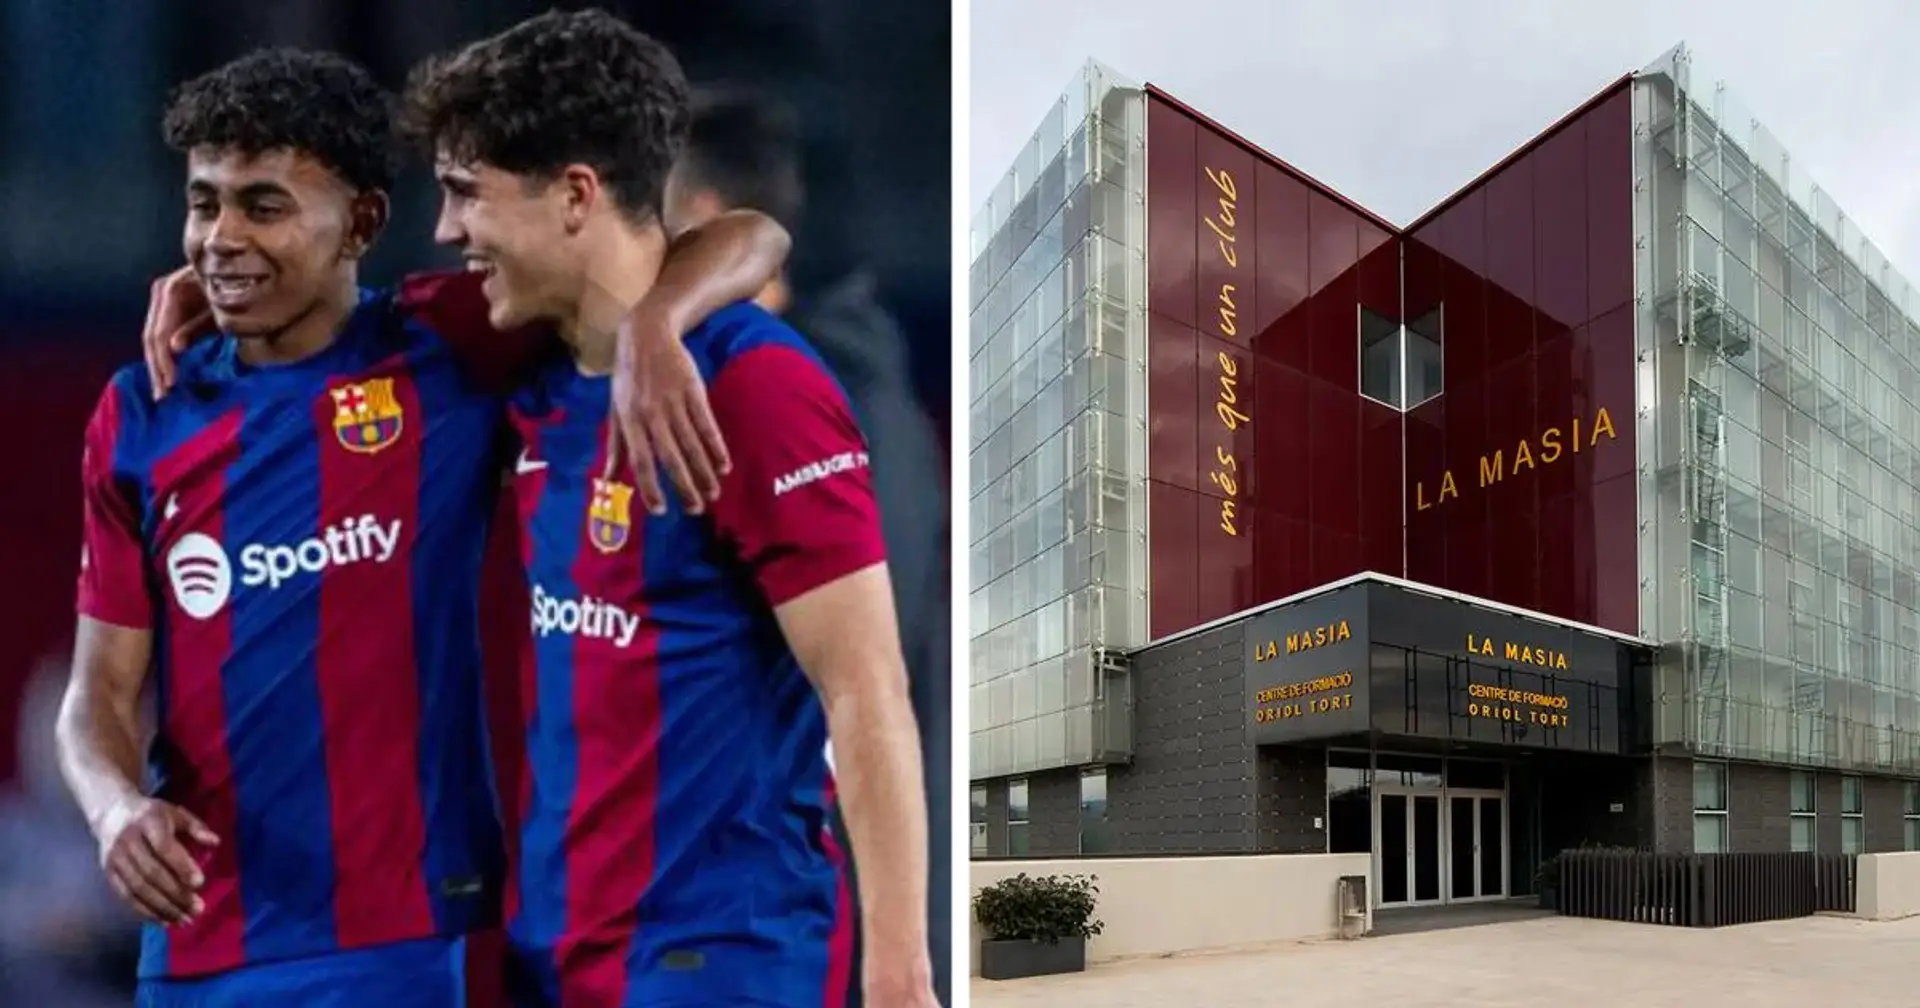 Spain's national team clearly shows why La Masia is the world's greatest academy